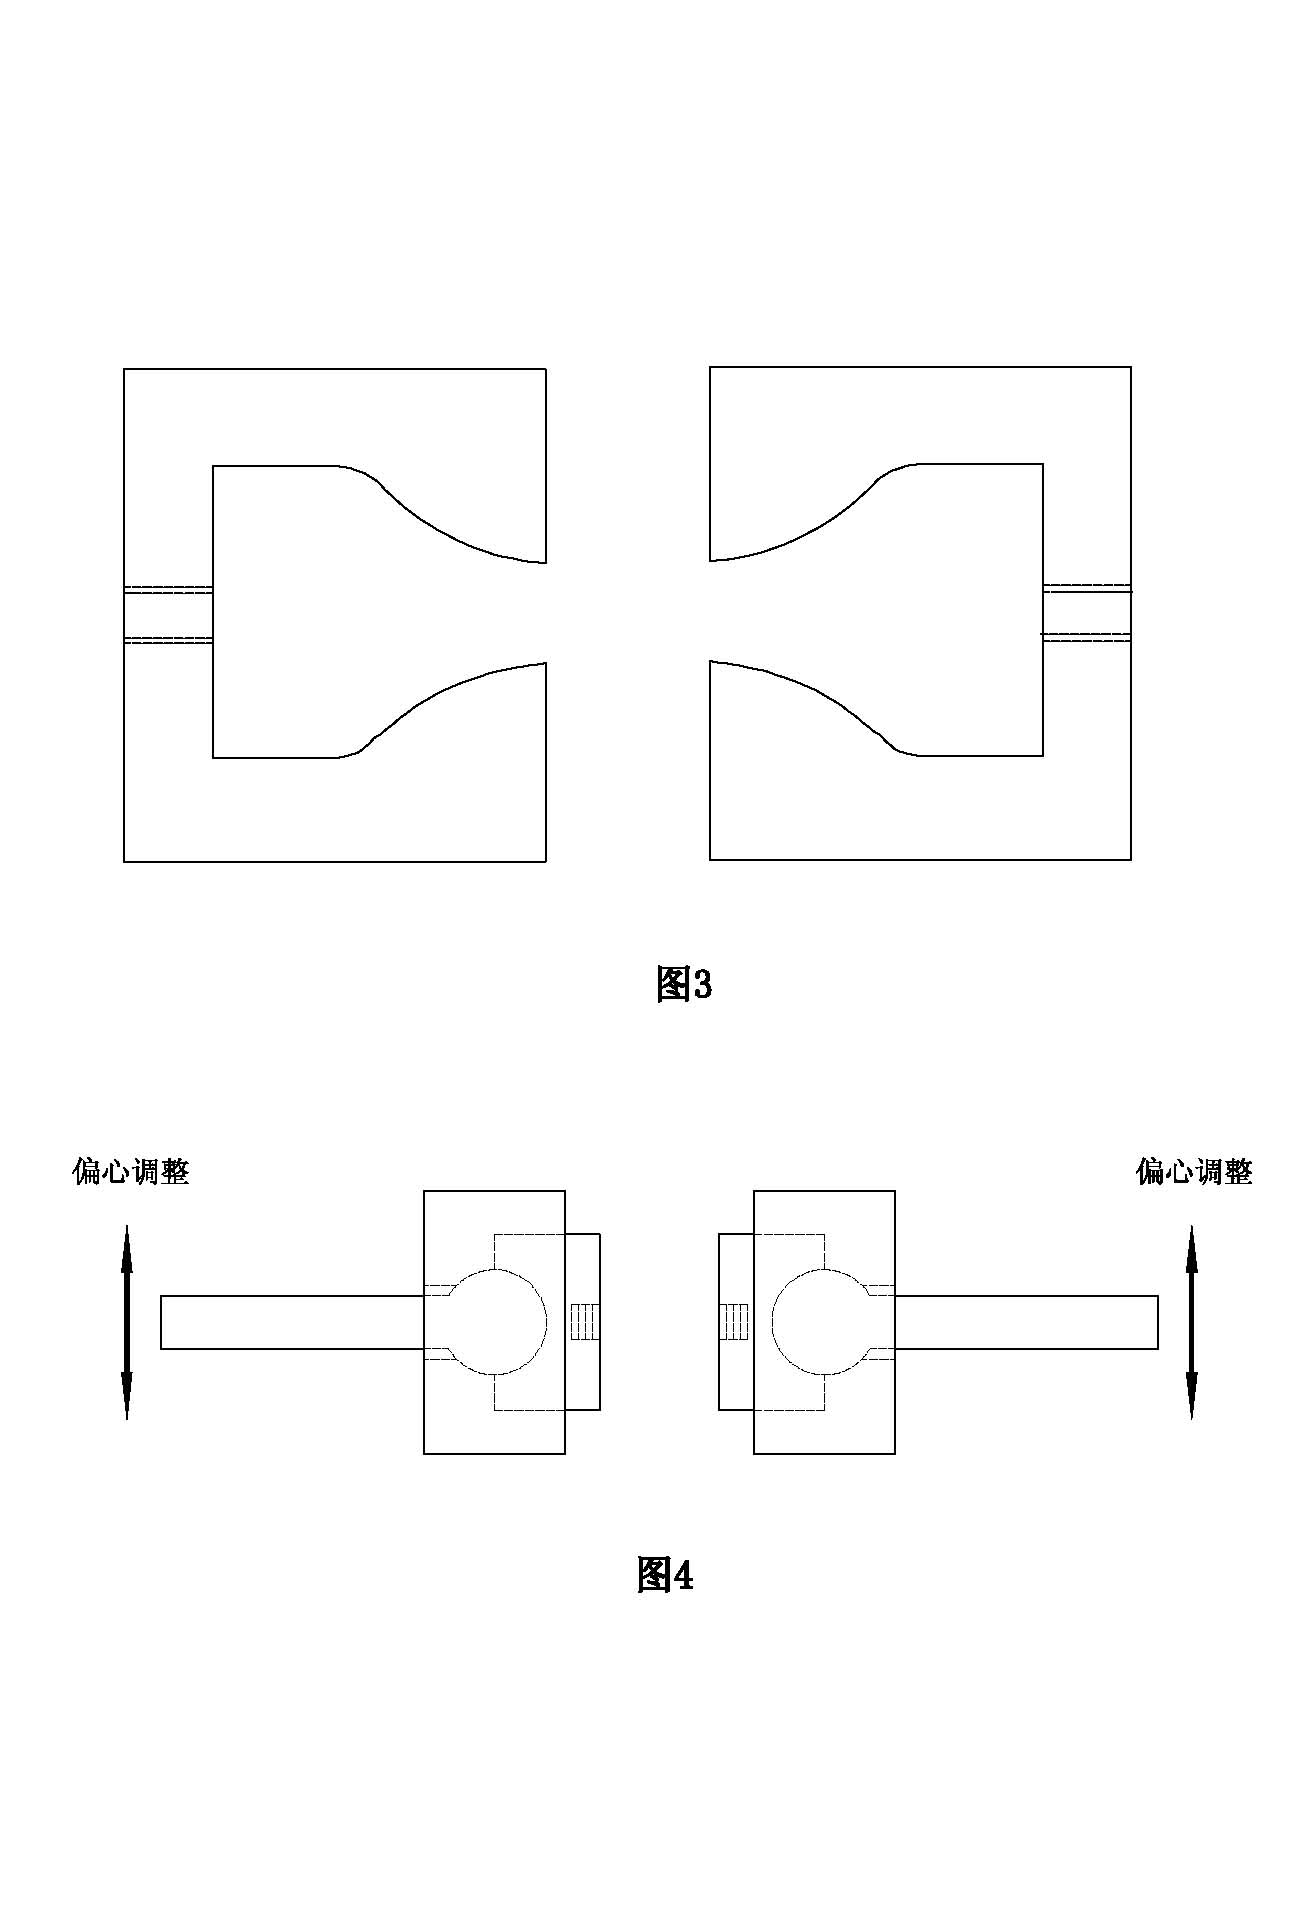 Testing device and method for bonding performance of fiber and mortar materials